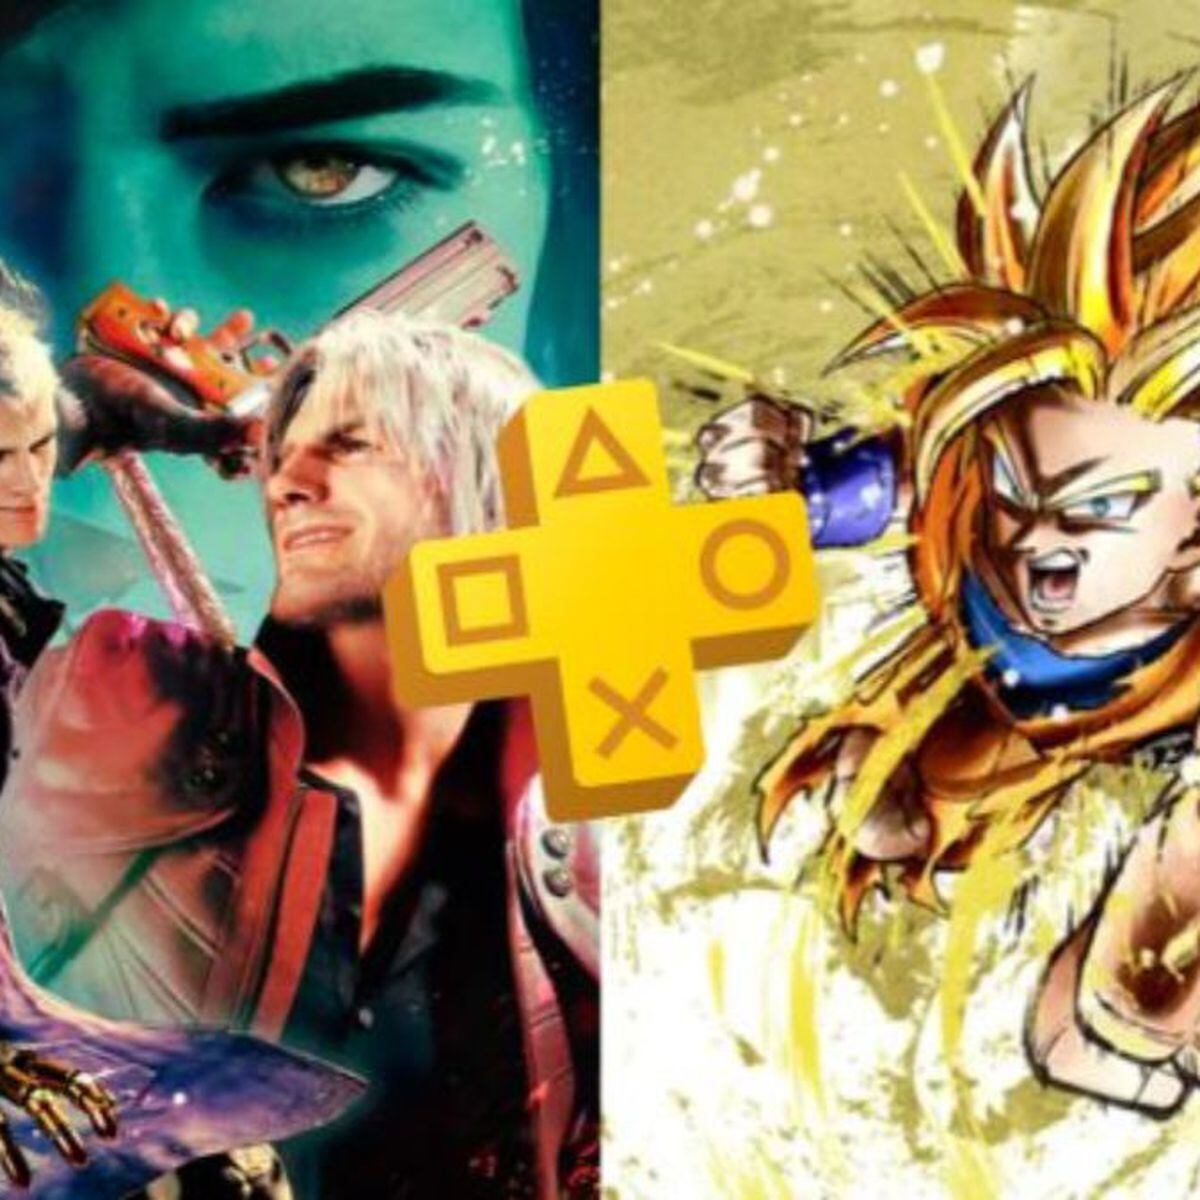 Update] PS Plus Extra/Deluxe Games - January 2023: Life Is Strange, Back 4  Blood, Devil May Cry 5 - Explosion Network